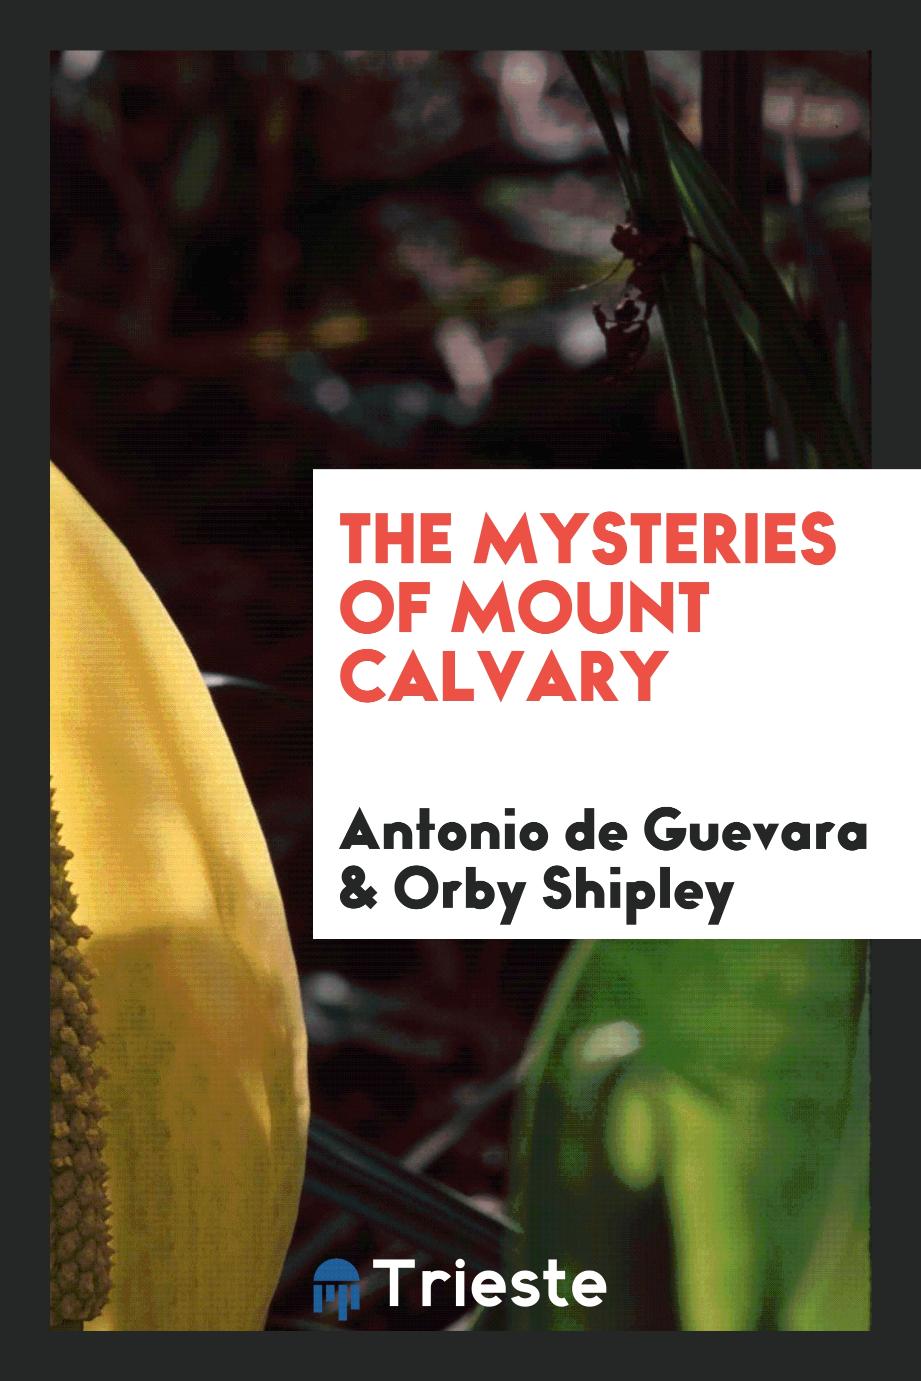 The mysteries of Mount Calvary